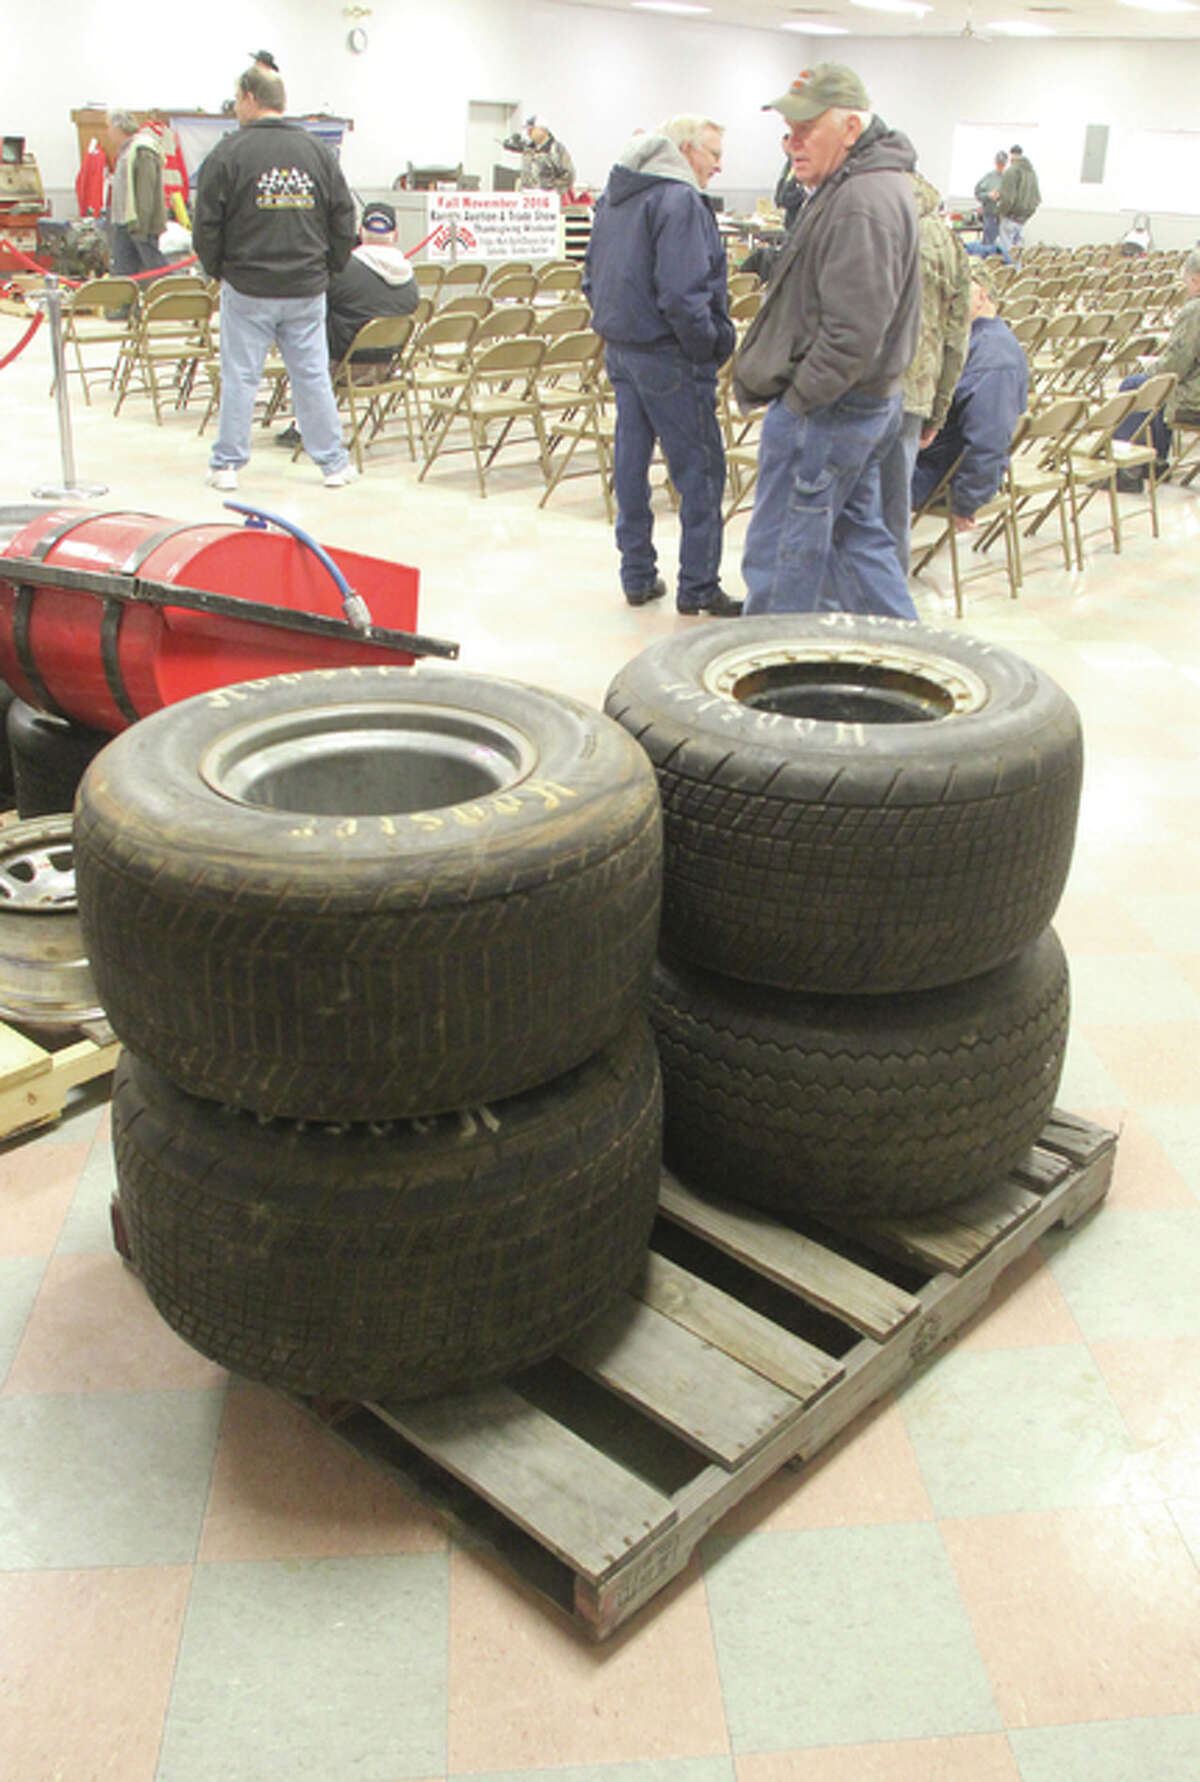 A set of racing tires was among more than 700 separate lots of items offered at a racer’s auction Saturday at Hilltop Auction.